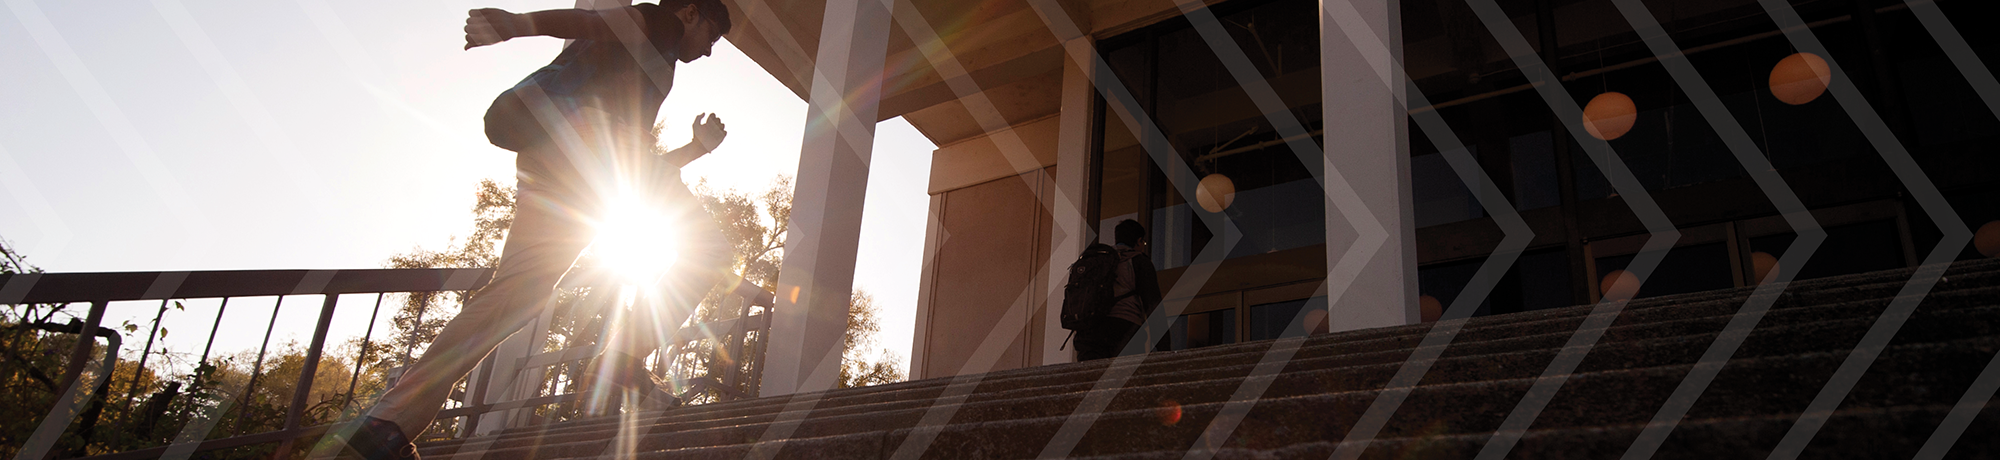 Image of backlit students running up stairs to class